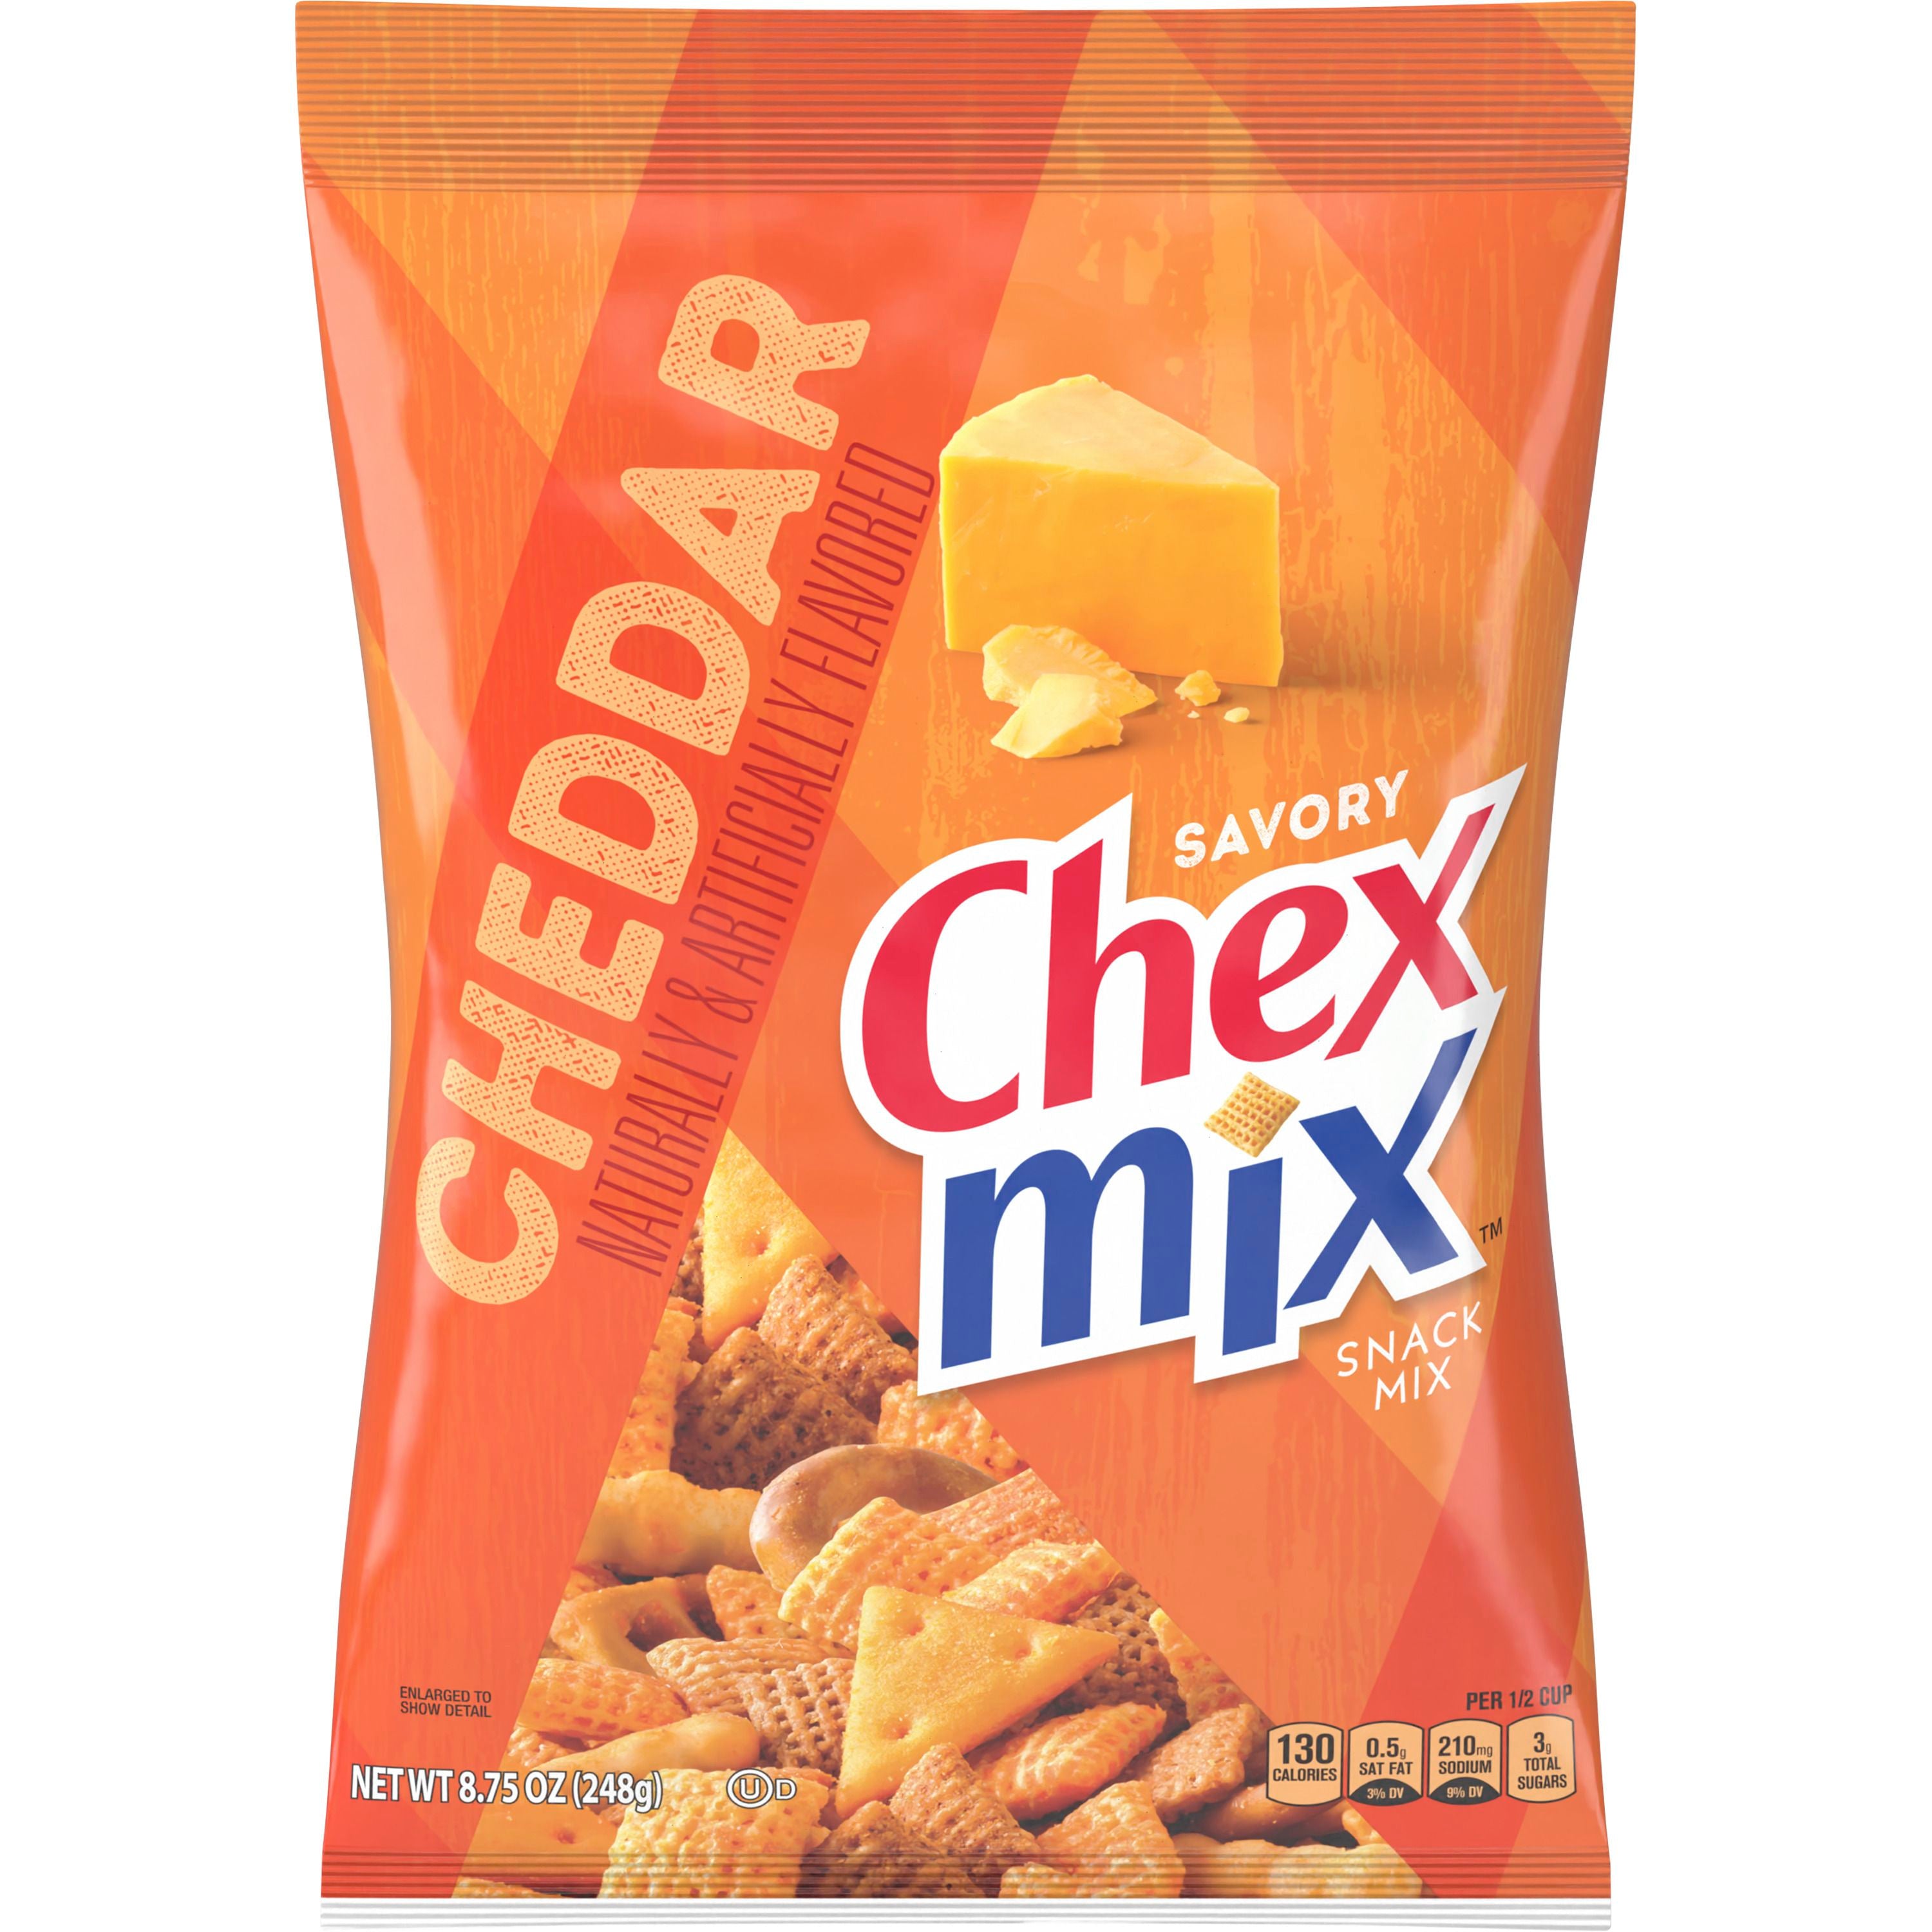 Chex Mix - Cheddar Snack Mix - 248g